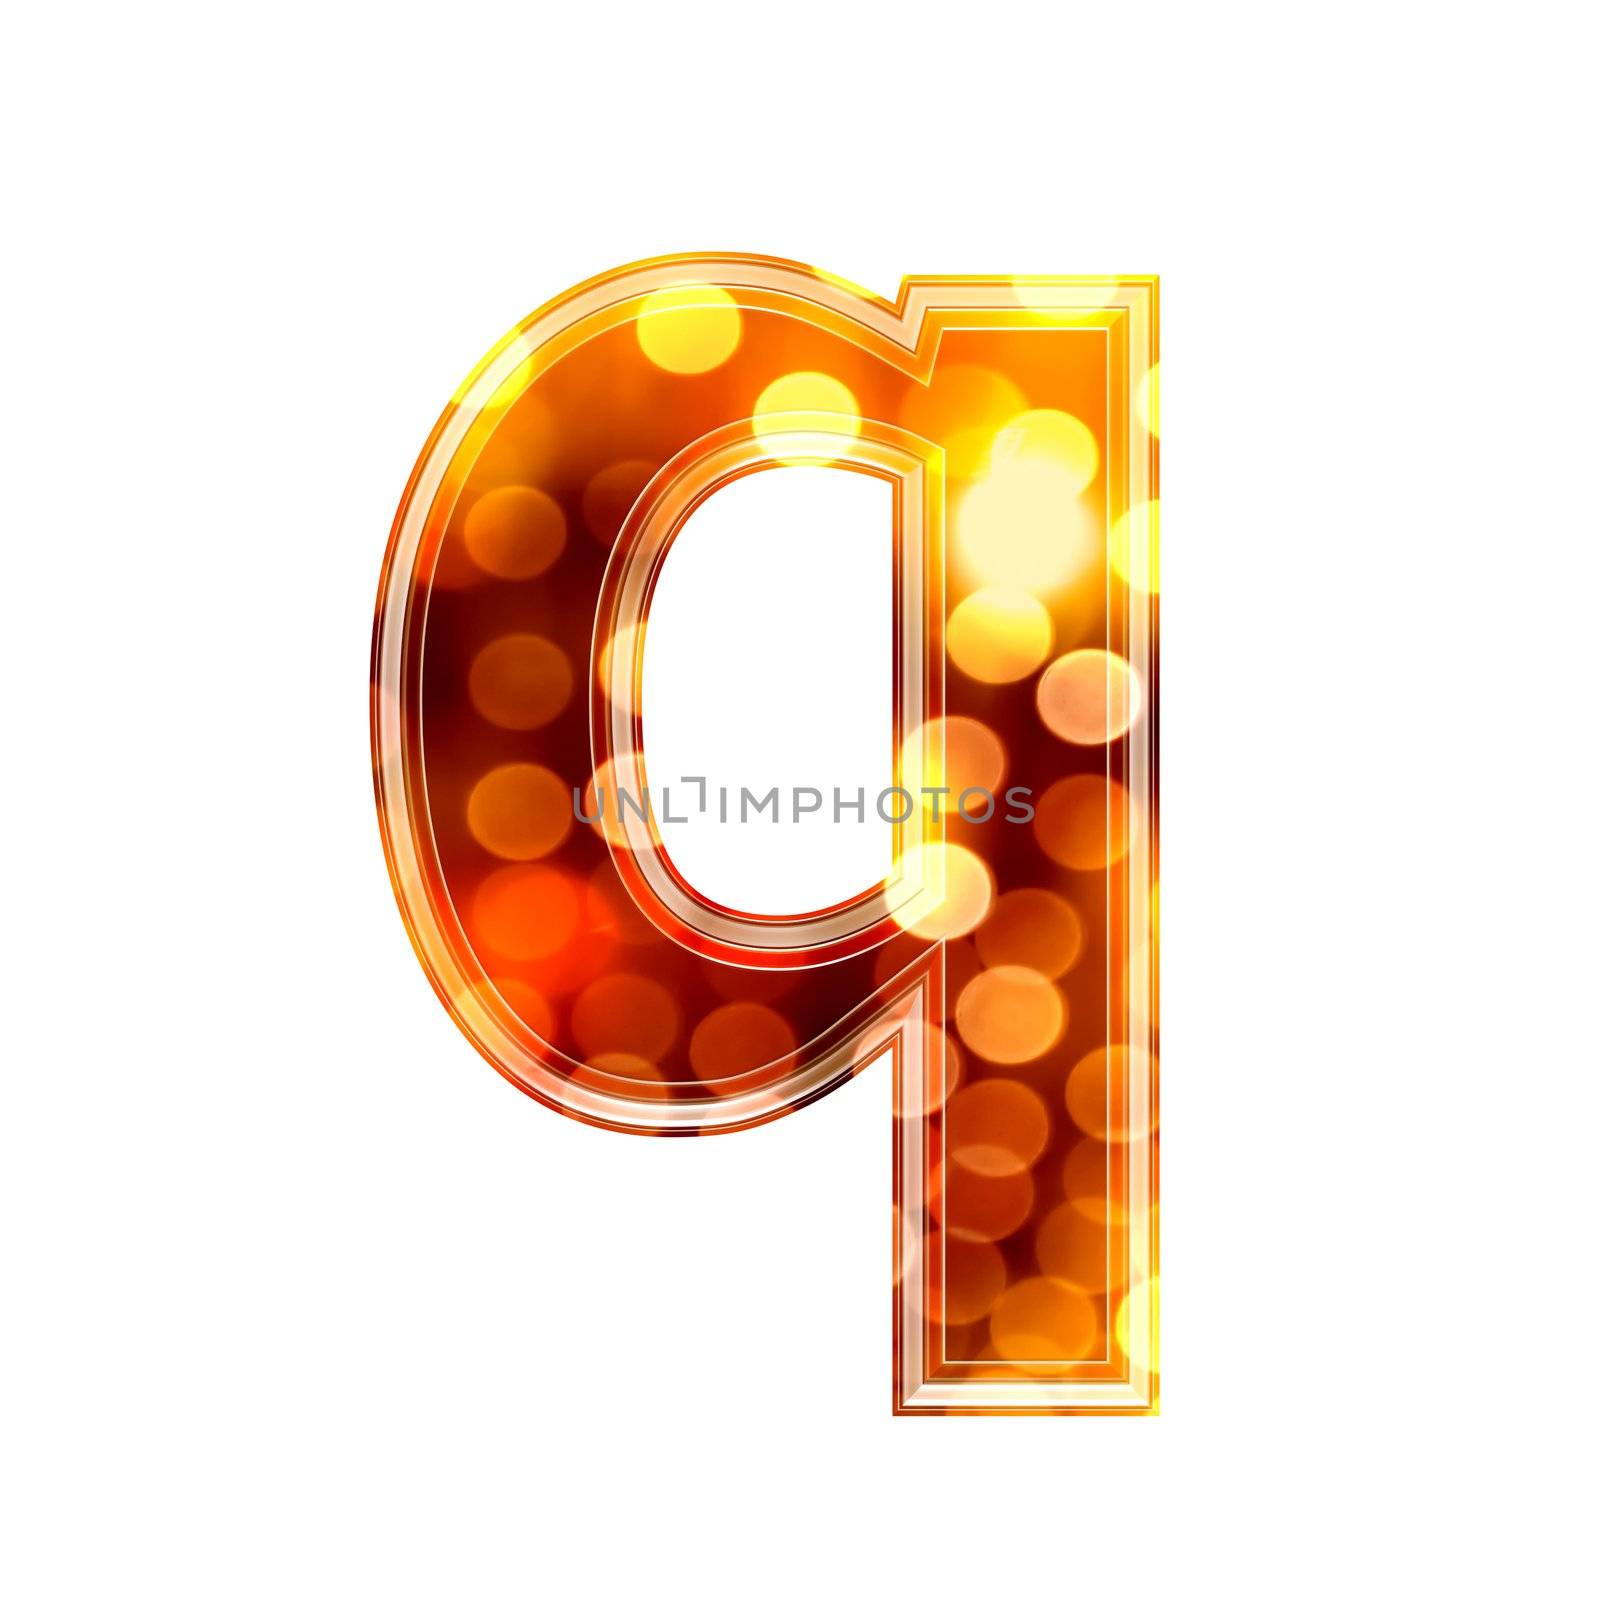 3d letter with glowing lights texture - q by chrisroll